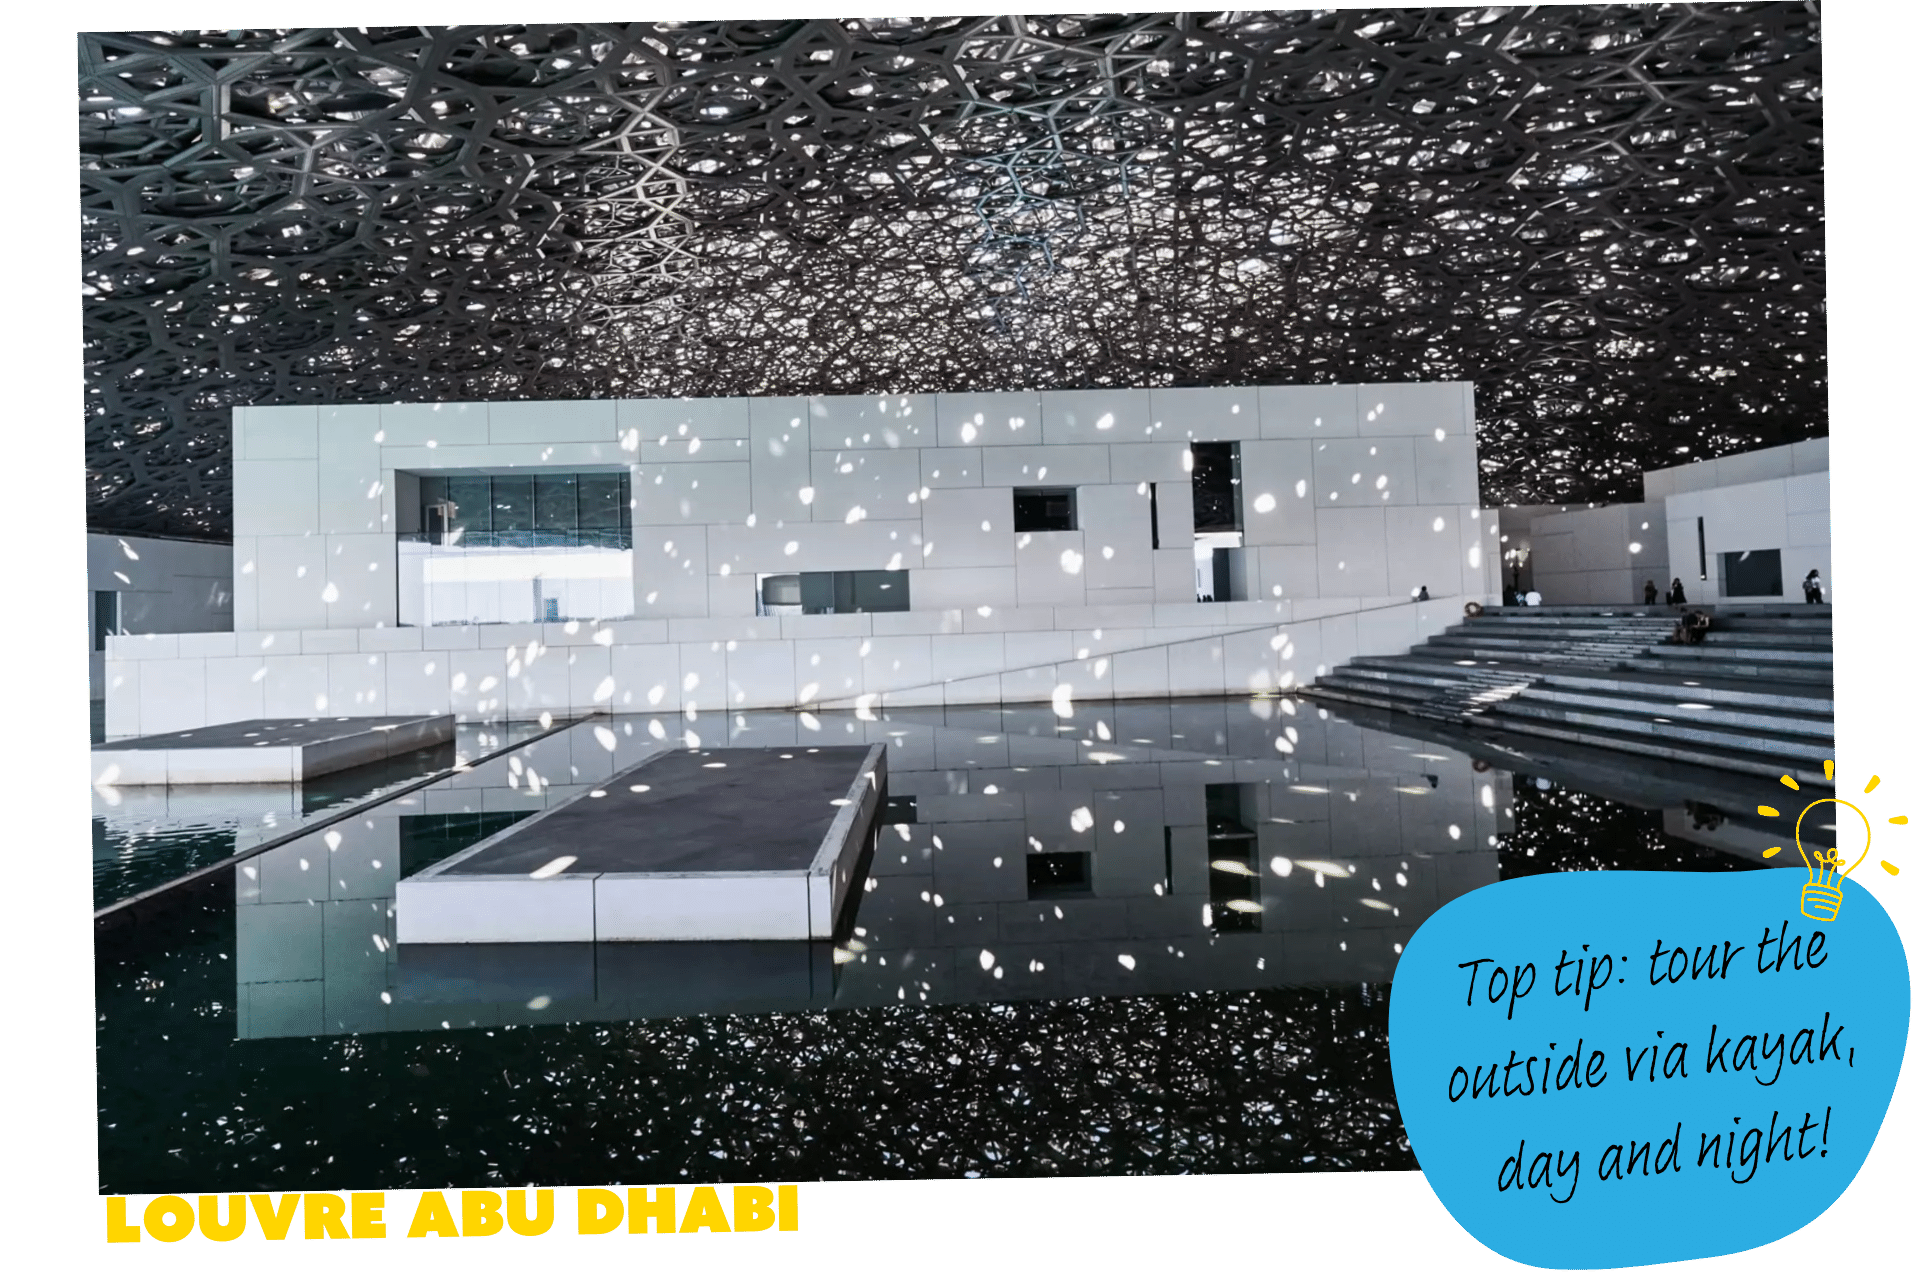 Interior of the Louvre Abu Dhabi - one of the Mission Impossible 7 filming locations